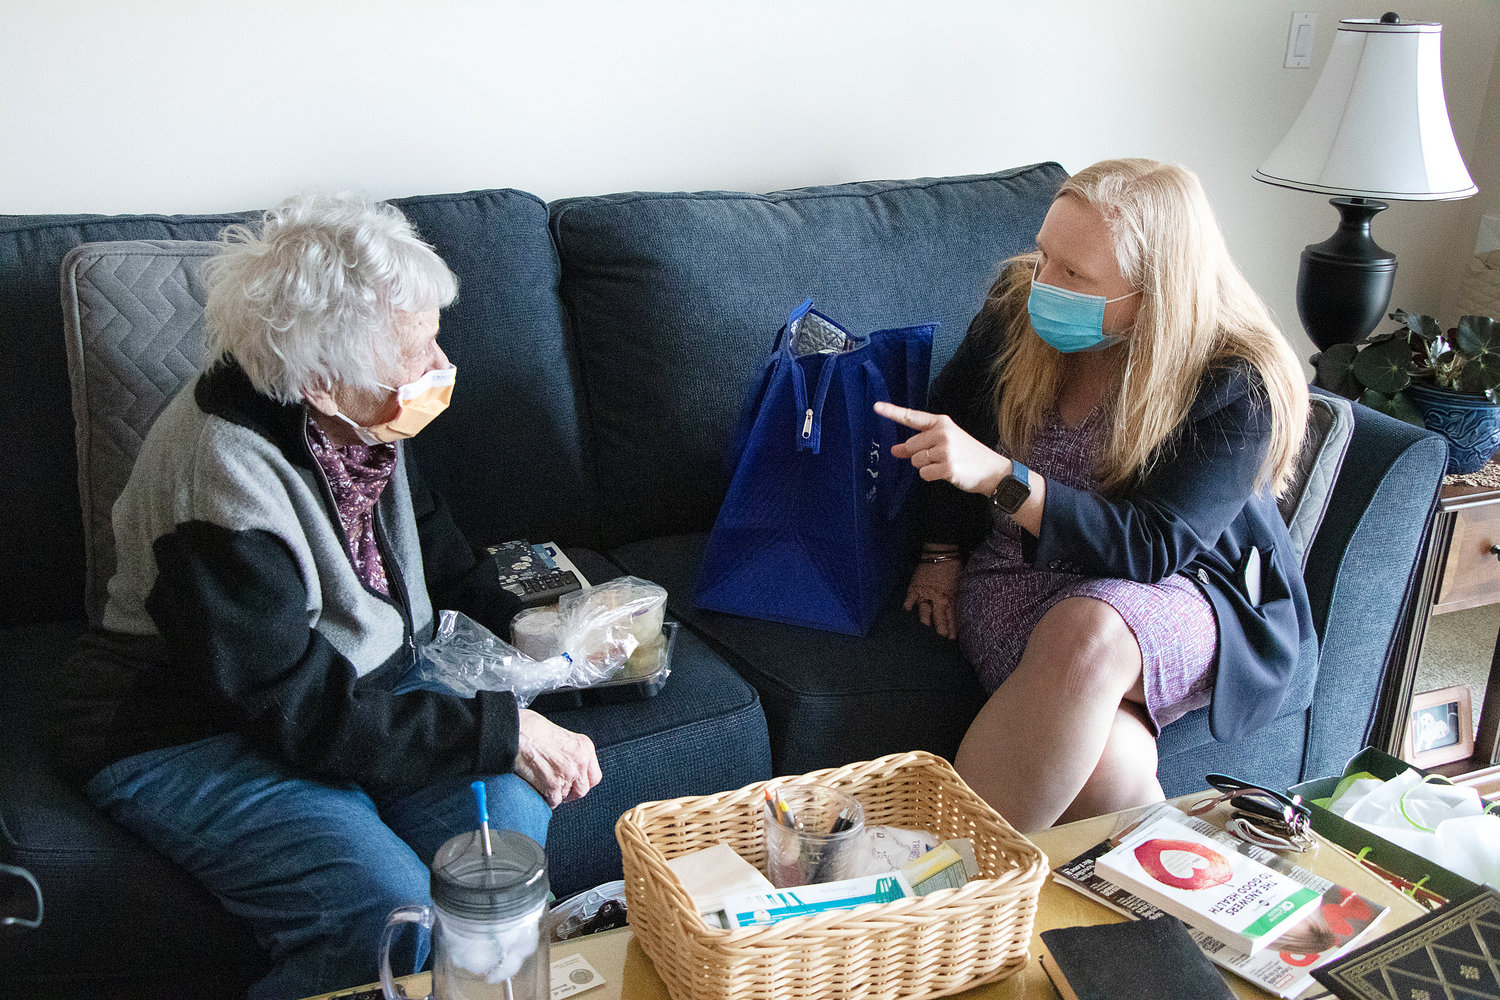 Helen Spets (left), a 95-year-old resident of Bay View Estates, chats with R.I. Meals on Wheels Executive Director Meghan Grady during a visit to her apartment on March 15. Town Council Vice President Linda Ujifusa also helped deliver a meal of shepherd’s pie, plus a blanket, slippers and a puzzle.